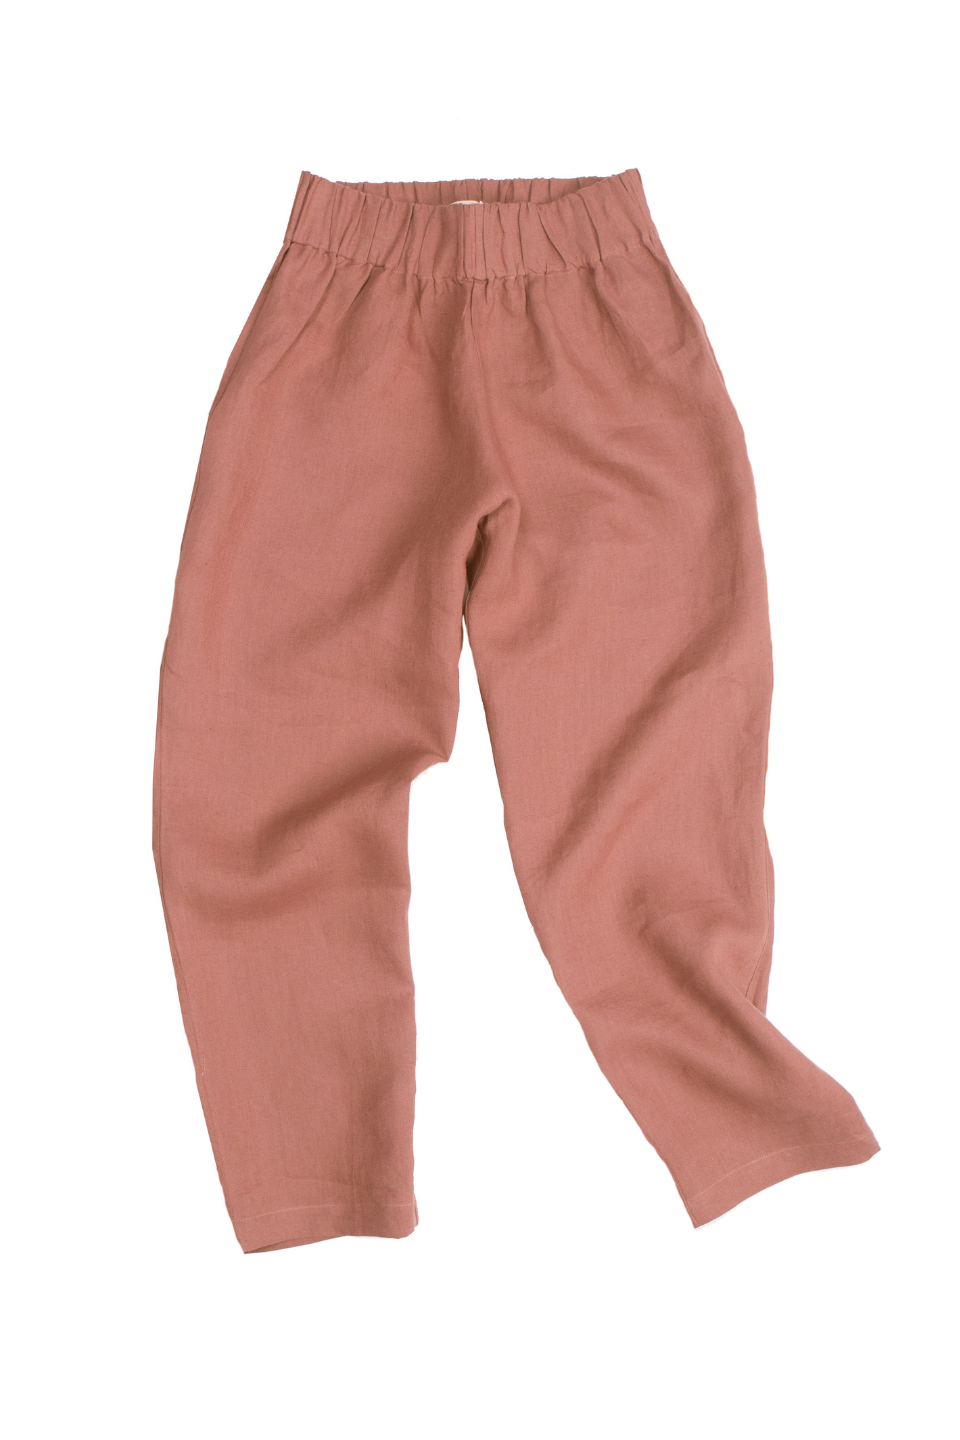 Puchi Pants Fearless Females SALE